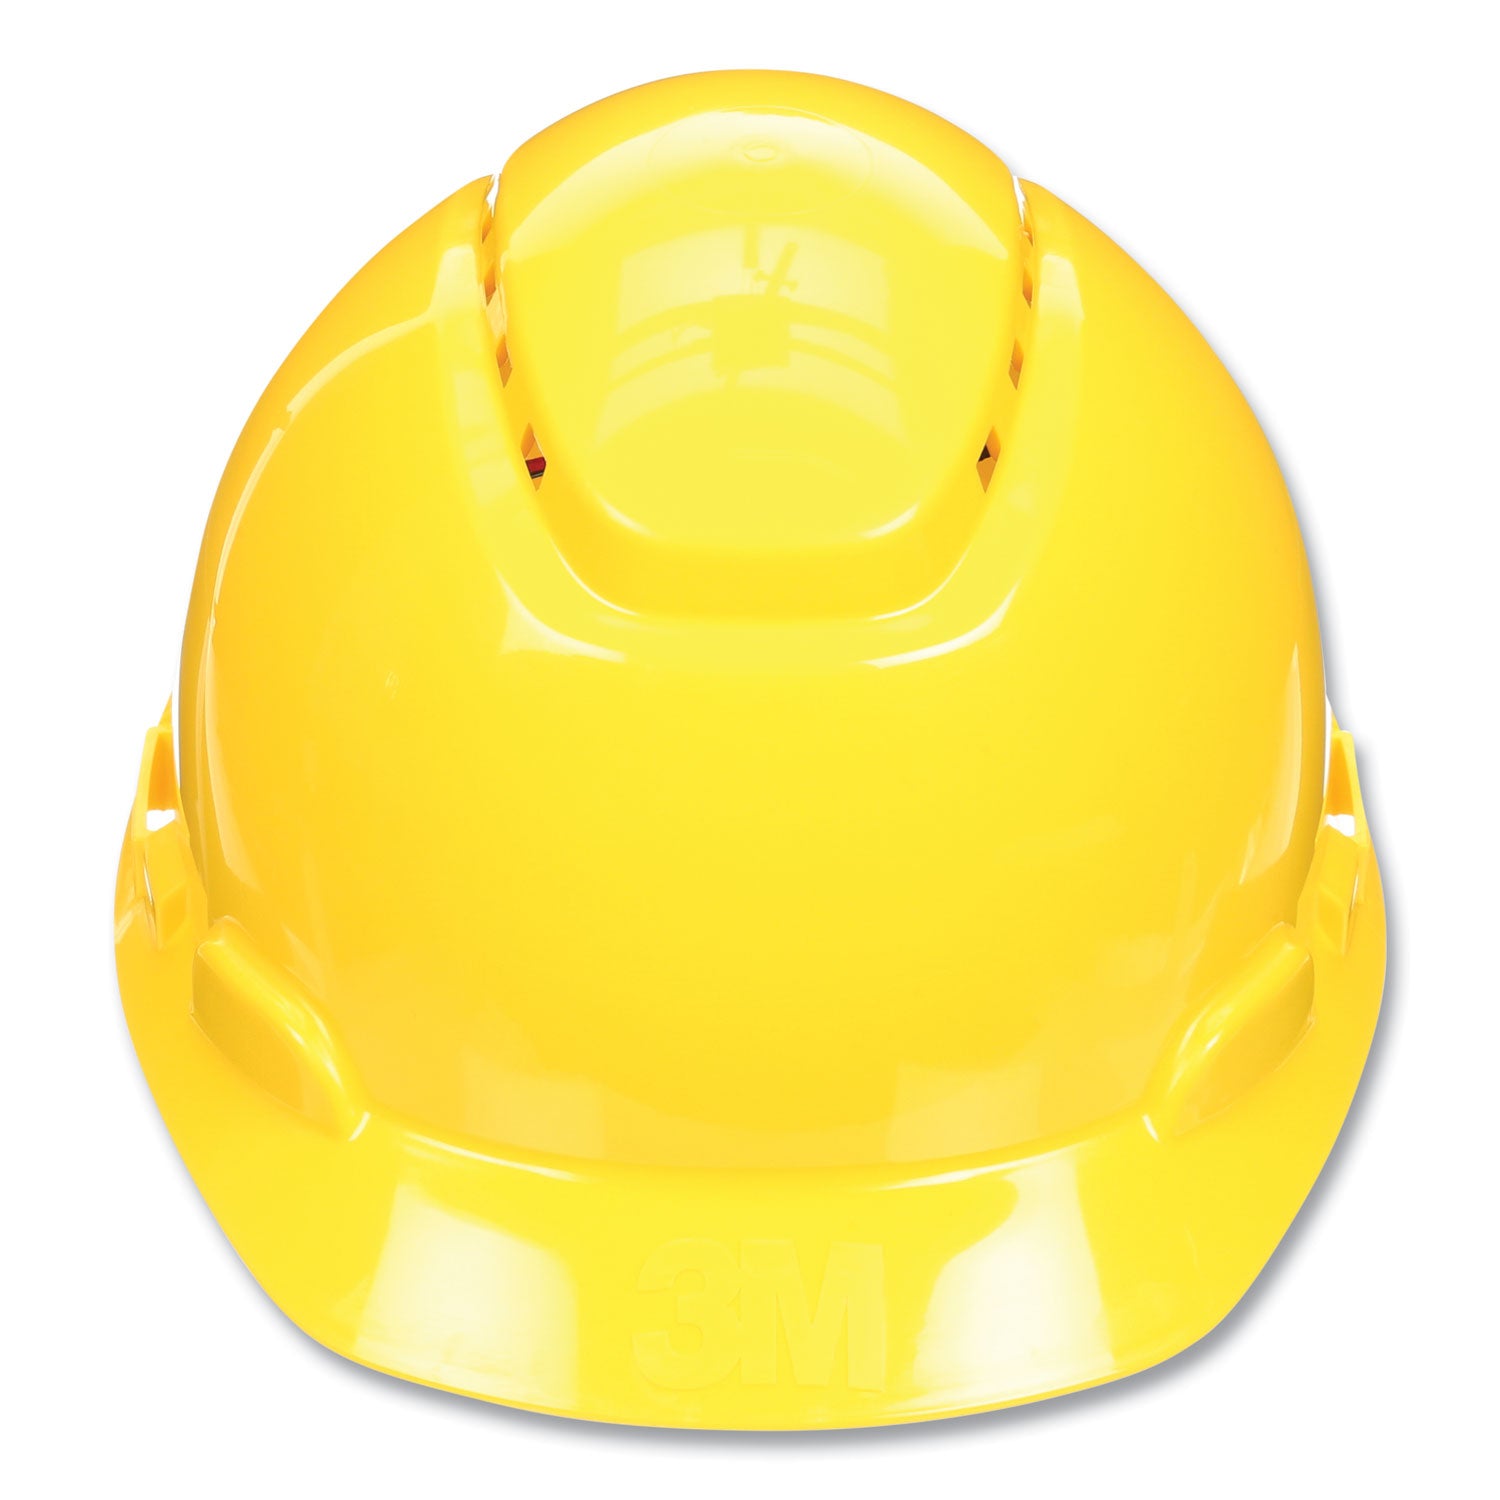 securefit-h-series-hard-hats-h-700-vented-cap-with-uv-indicator-4-point-pressure-diffusion-ratchet-suspension-yellow_mmmh702sfvuv - 1